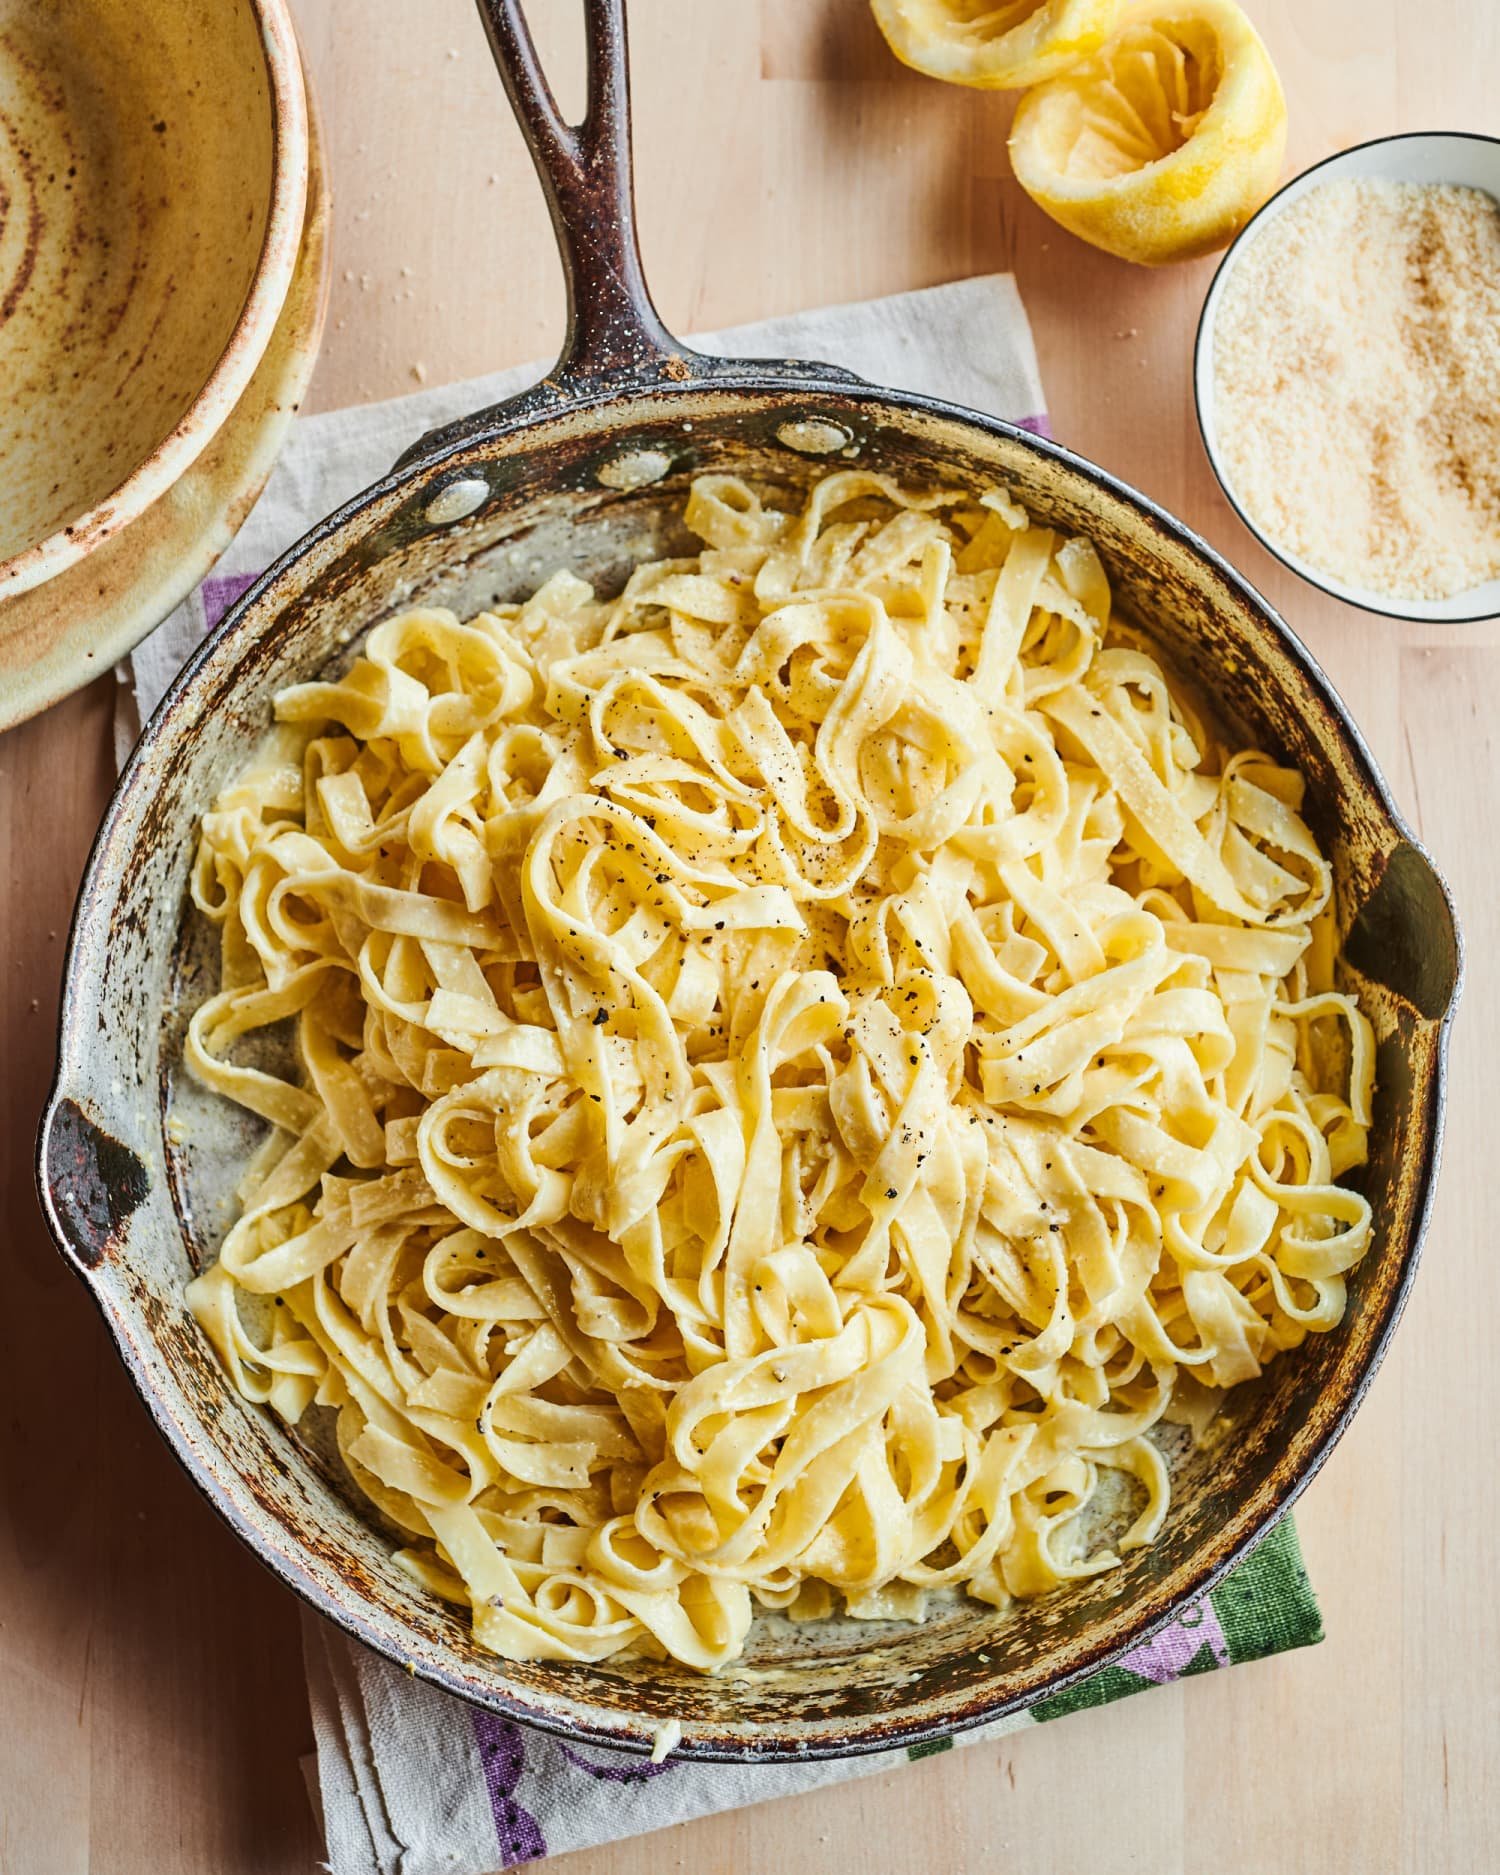 Pasta al Limone Is the Easy Italian Pasta You'll Want to Make Every Night